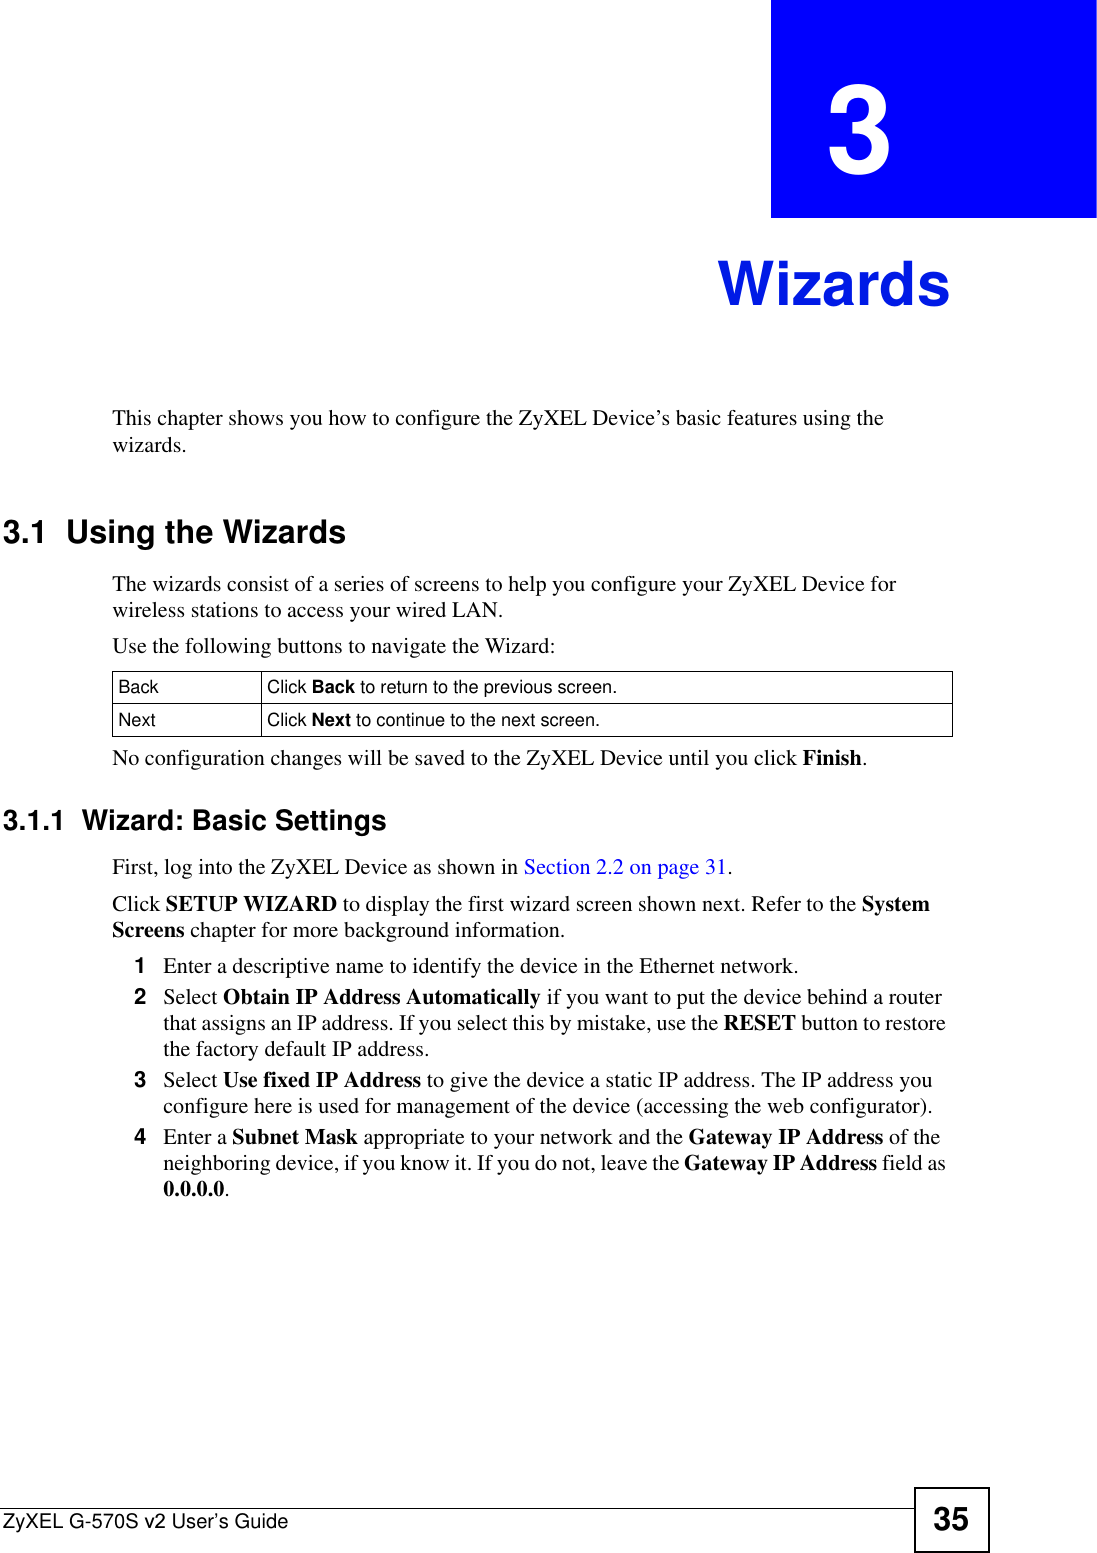 ZyXEL G-570S v2 User’s Guide 35CHAPTER  3 WizardsThis chapter shows you how to configure the ZyXEL Device’s basic features using the wizards.3.1  Using the WizardsThe wizards consist of a series of screens to help you configure your ZyXEL Device for wireless stations to access your wired LAN. Use the following buttons to navigate the Wizard:No configuration changes will be saved to the ZyXEL Device until you click Finish.3.1.1  Wizard: Basic Settings First, log into the ZyXEL Device as shown in Section 2.2 on page 31.Click SETUP WIZARD to display the first wizard screen shown next. Refer to the SystemScreens chapter for more background information.1Enter a descriptive name to identify the device in the Ethernet network.2Select Obtain IP Address Automatically if you want to put the device behind a router that assigns an IP address. If you select this by mistake, use the RESET button to restore the factory default IP address. 3Select Use fixed IP Address to give the device a static IP address. The IP address you configure here is used for management of the device (accessing the web configurator).4Enter a Subnet Mask appropriate to your network and the Gateway IP Address of the neighboring device, if you know it. If you do not, leave the Gateway IP Address field as 0.0.0.0.Back Click Back to return to the previous screen.  Next Click Next to continue to the next screen. 